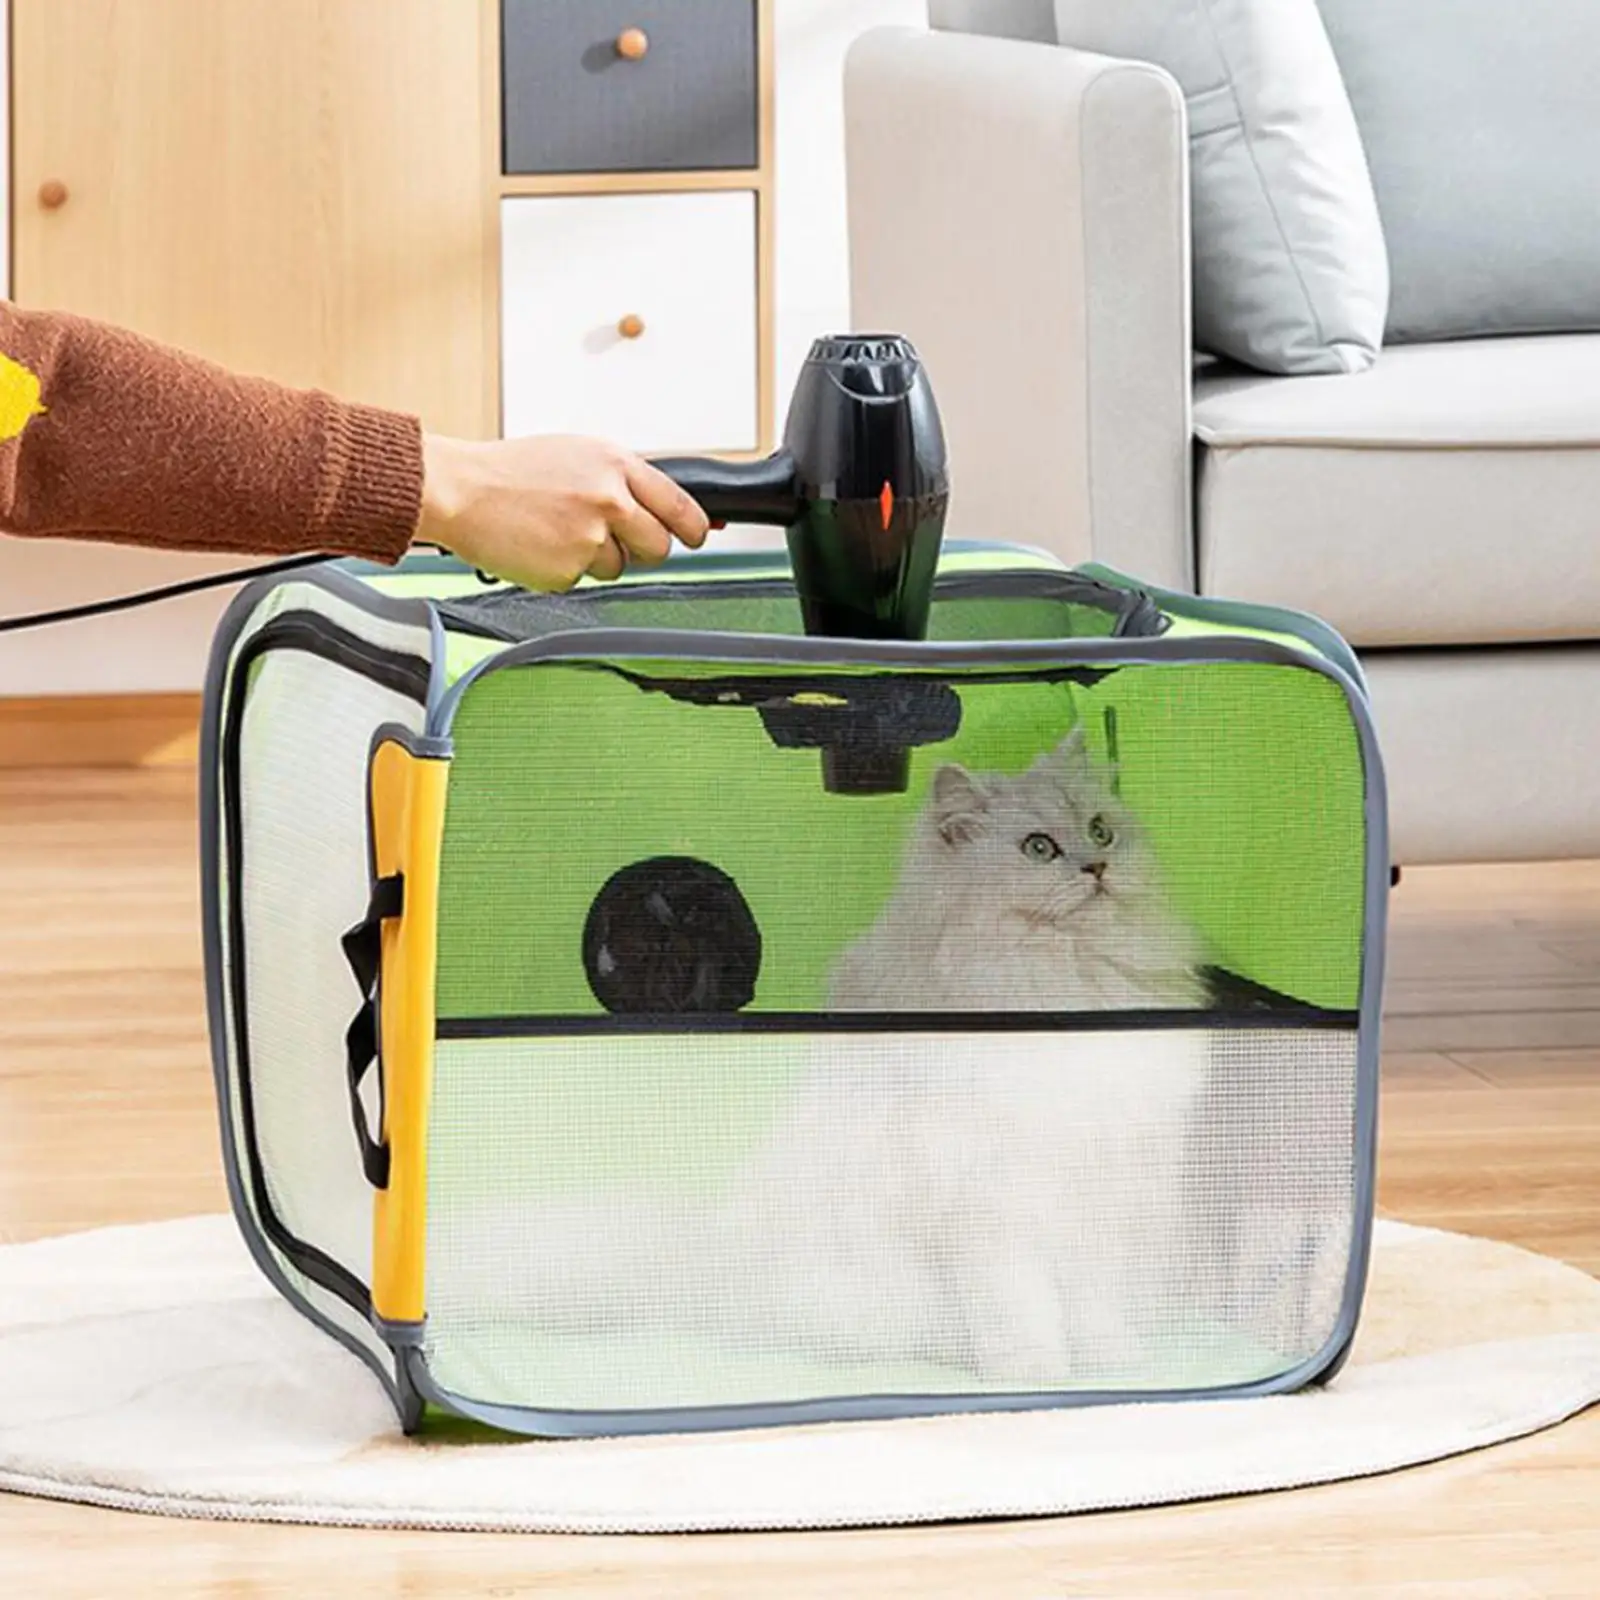 Cats Dogs Dryer Cage Hair Dryer Clean House Grooming Portable Travel Bags Pet Drying Box for Doggy Puppy Kitten Bath Shop